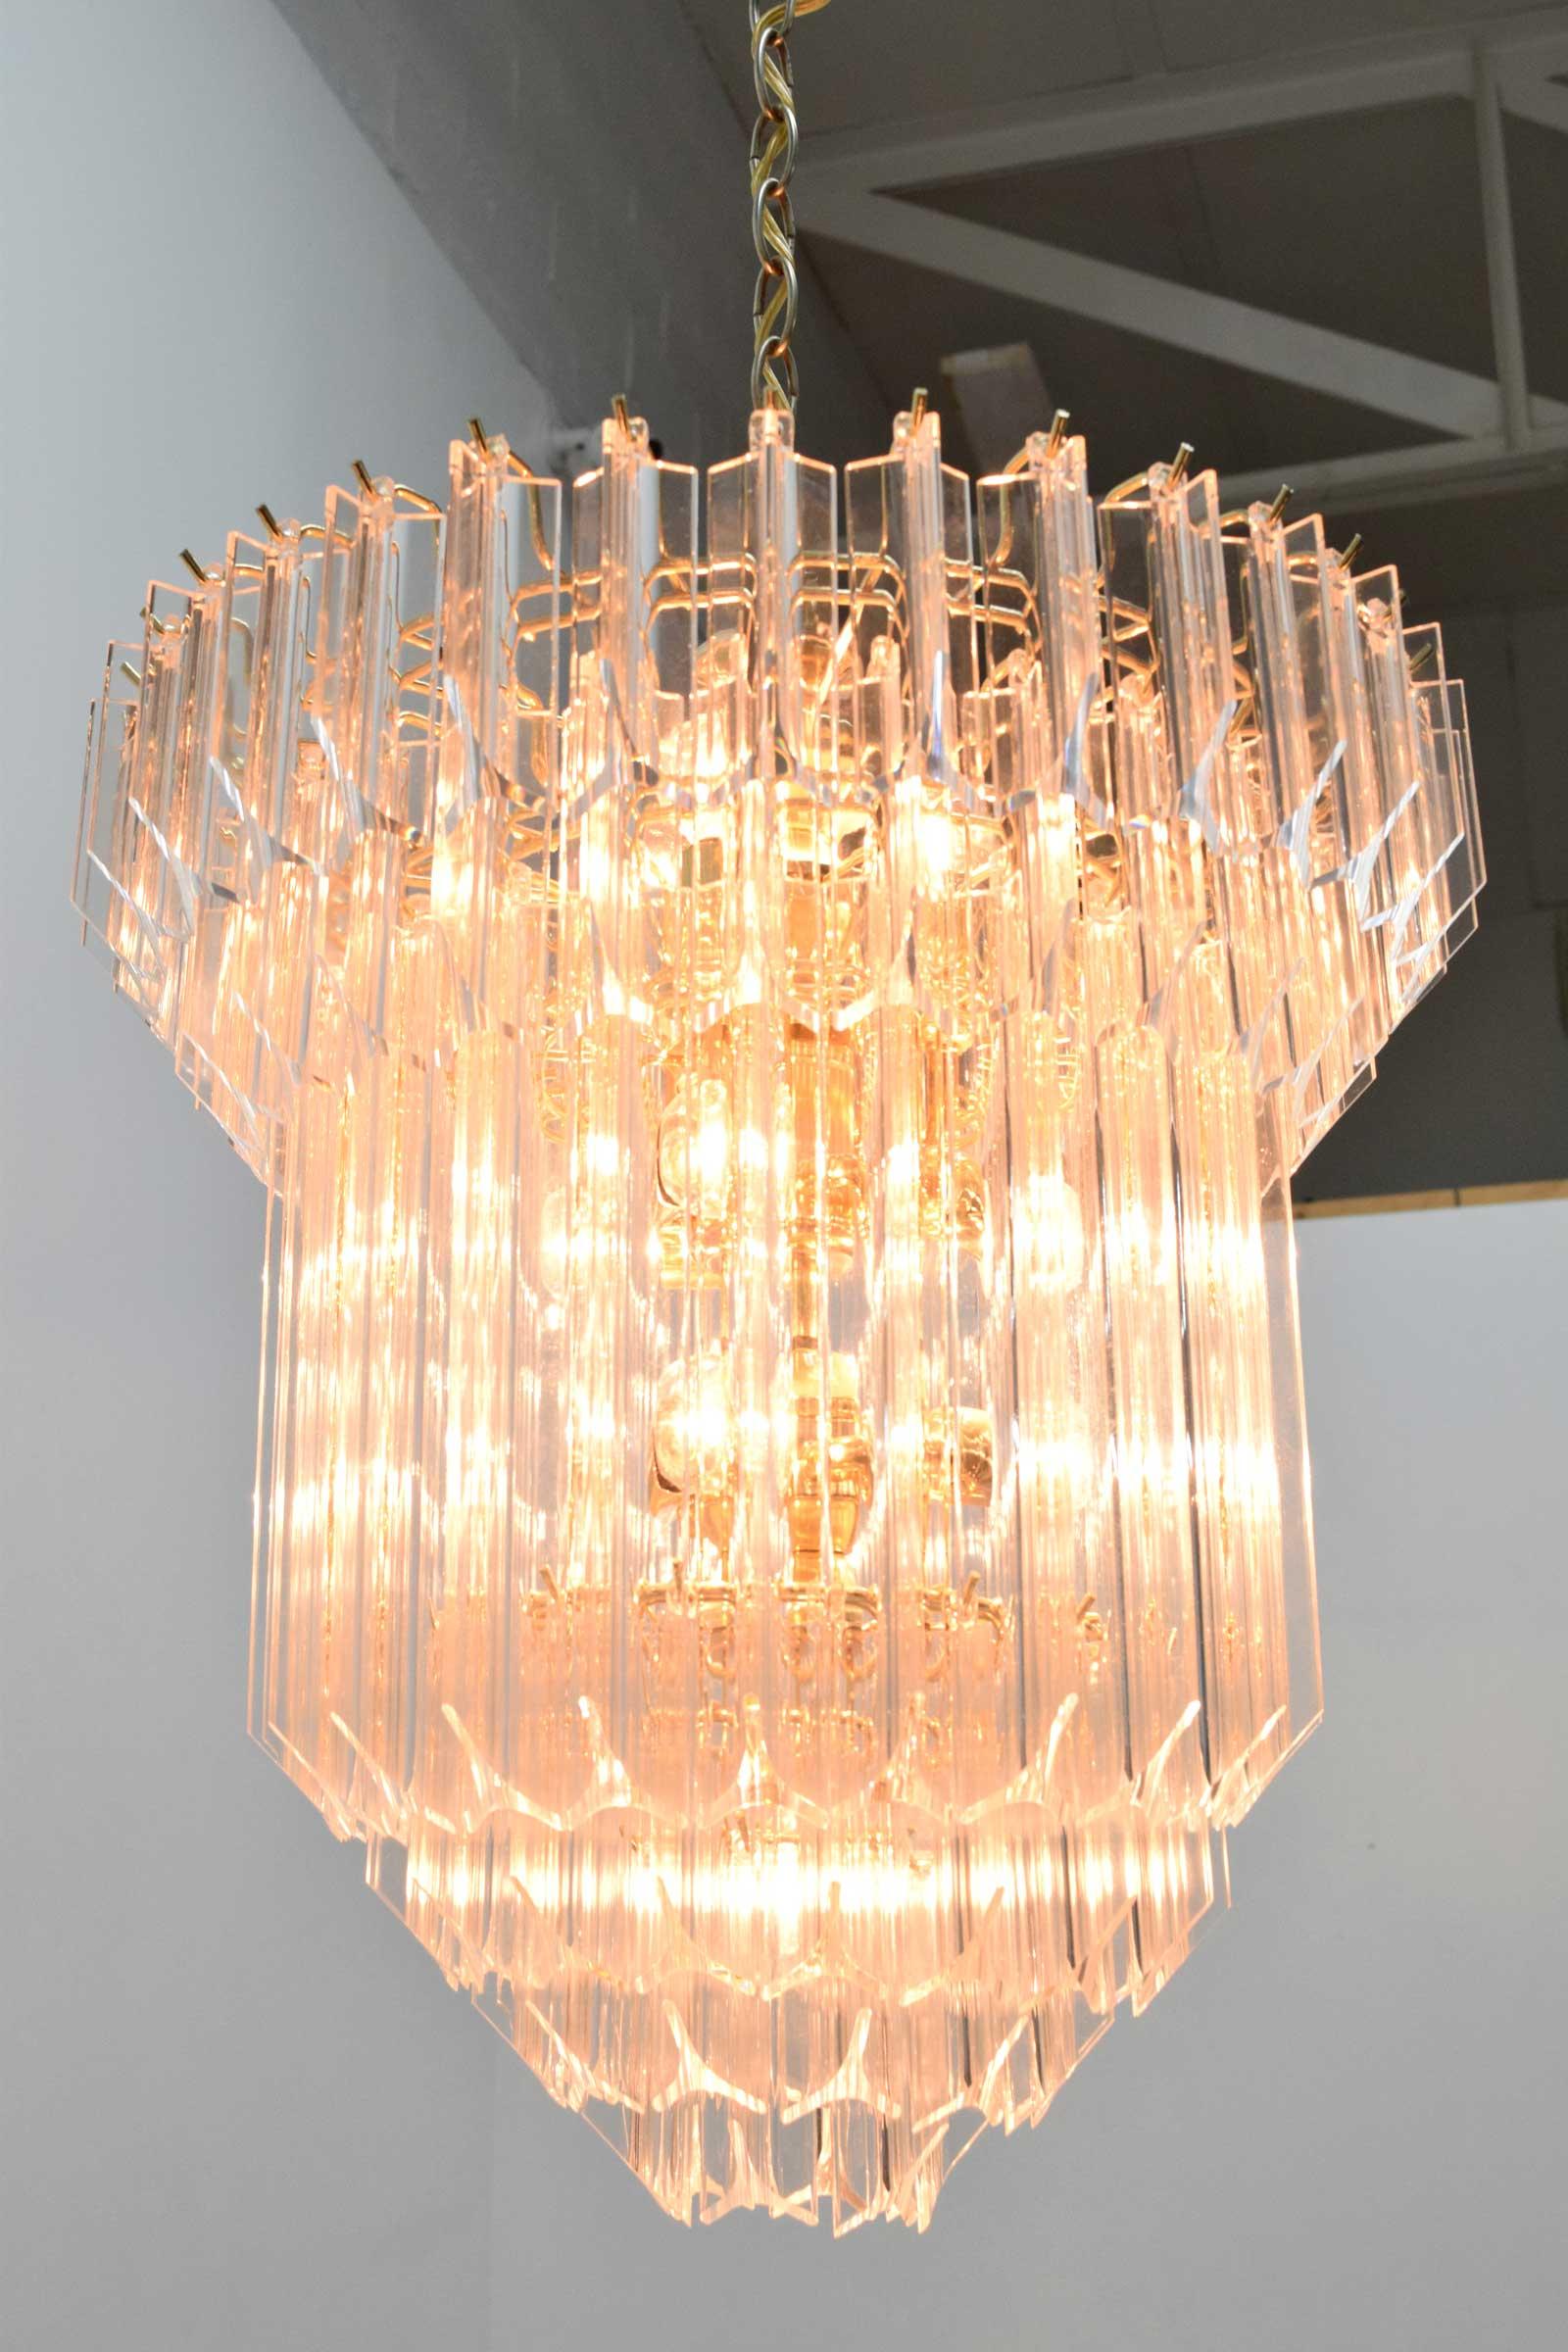 Large Lucite Chandelier, Six Tiers, 1970s For Sale 1